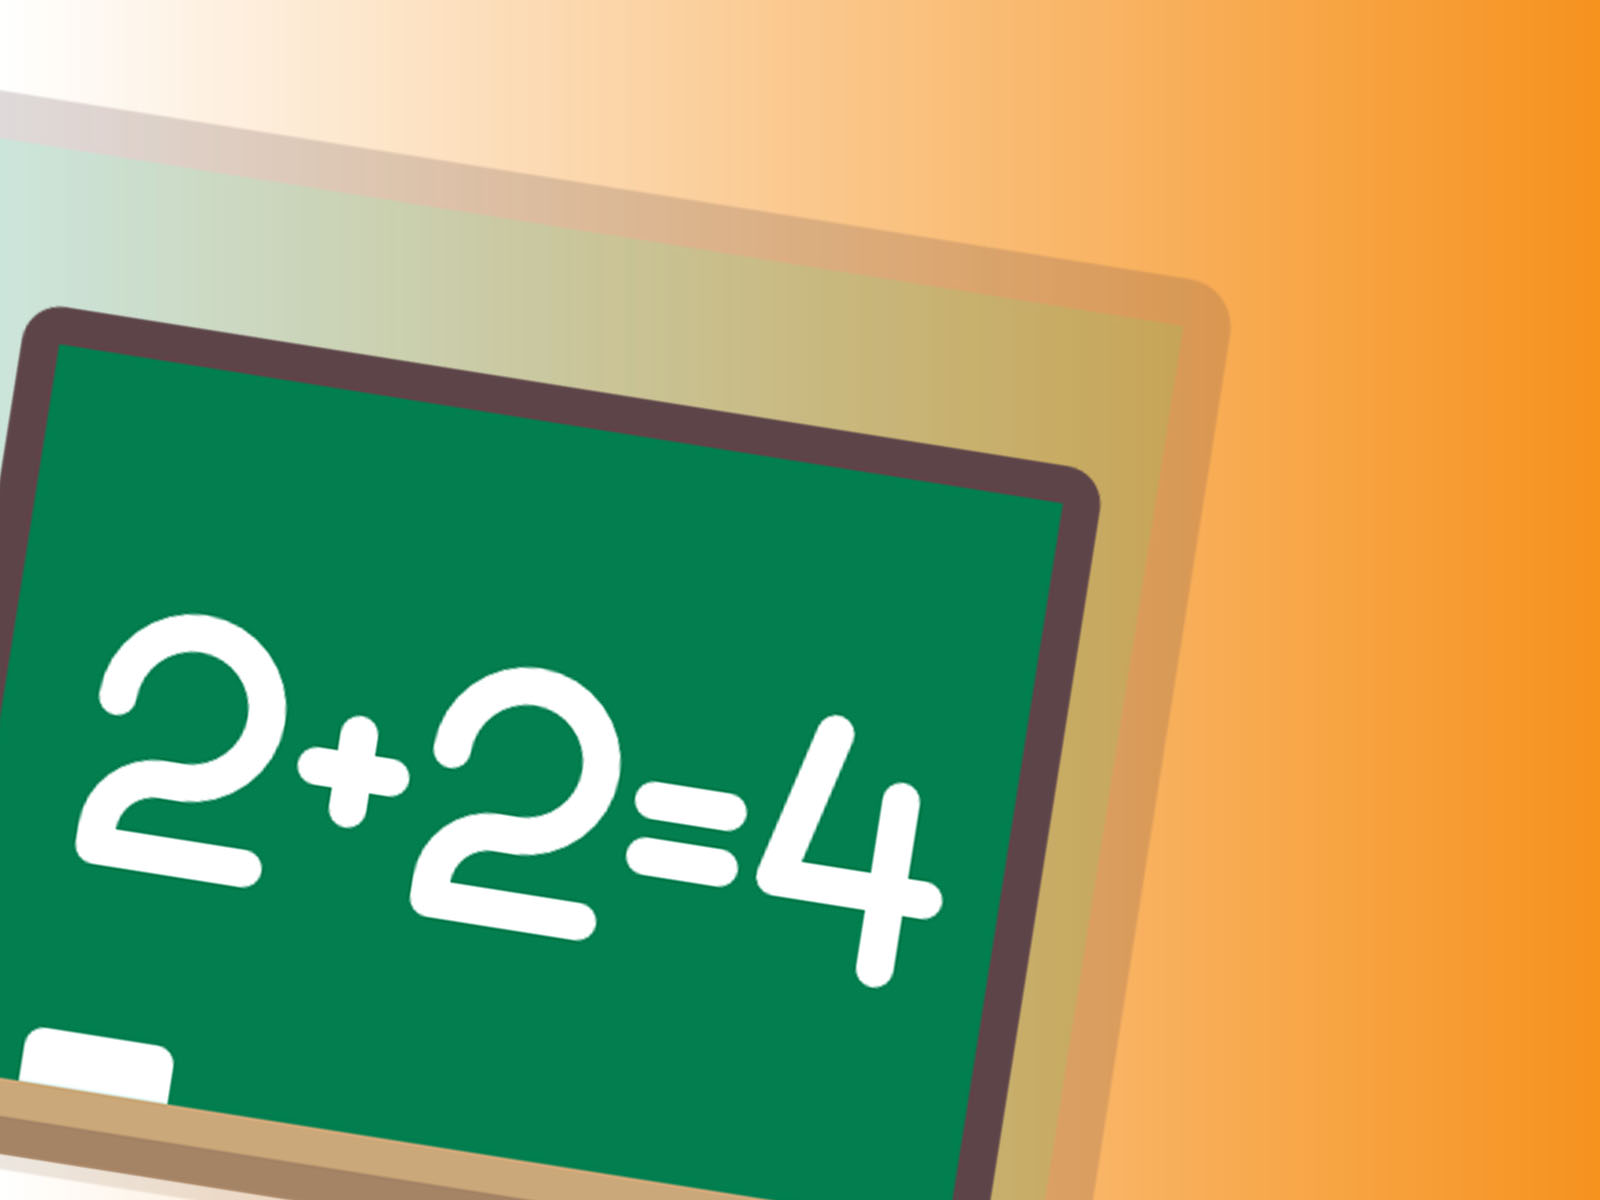 Math Board Powerpoint Templates - Border & Frames, Education, Orange - Free PPT  Backgrounds and Templates